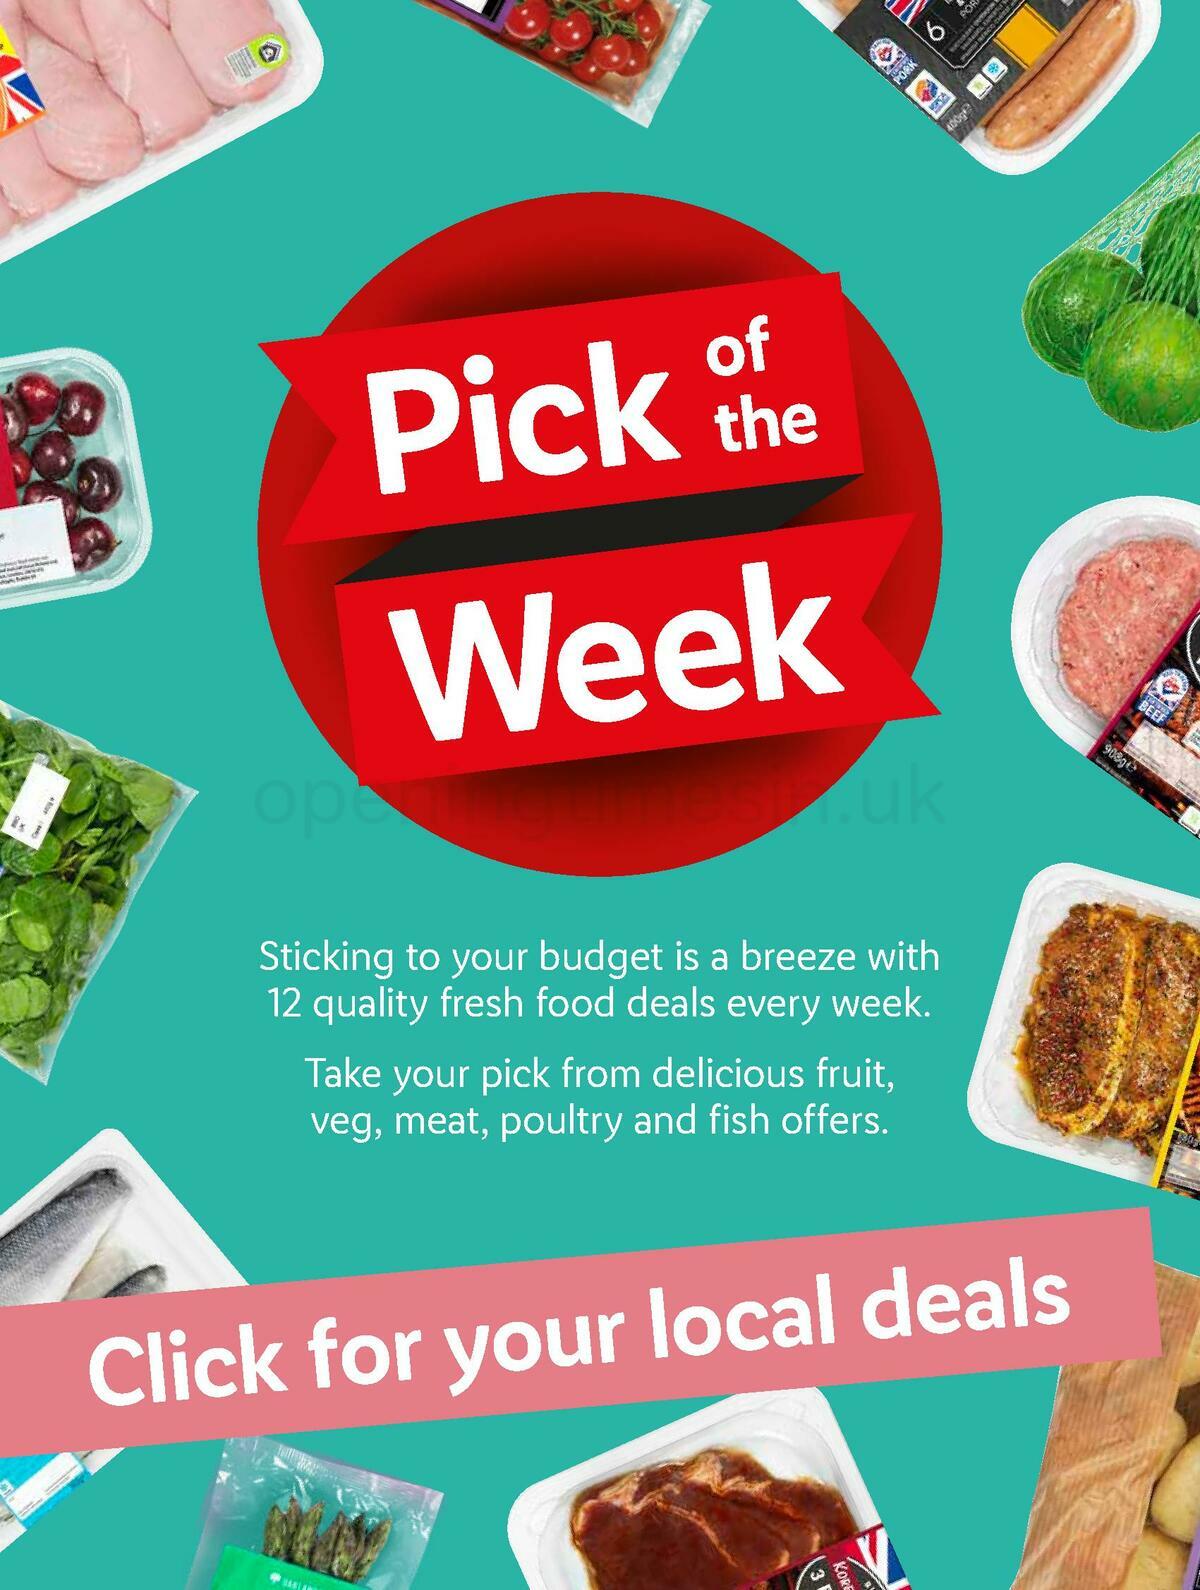 LIDL Offers from 15 September